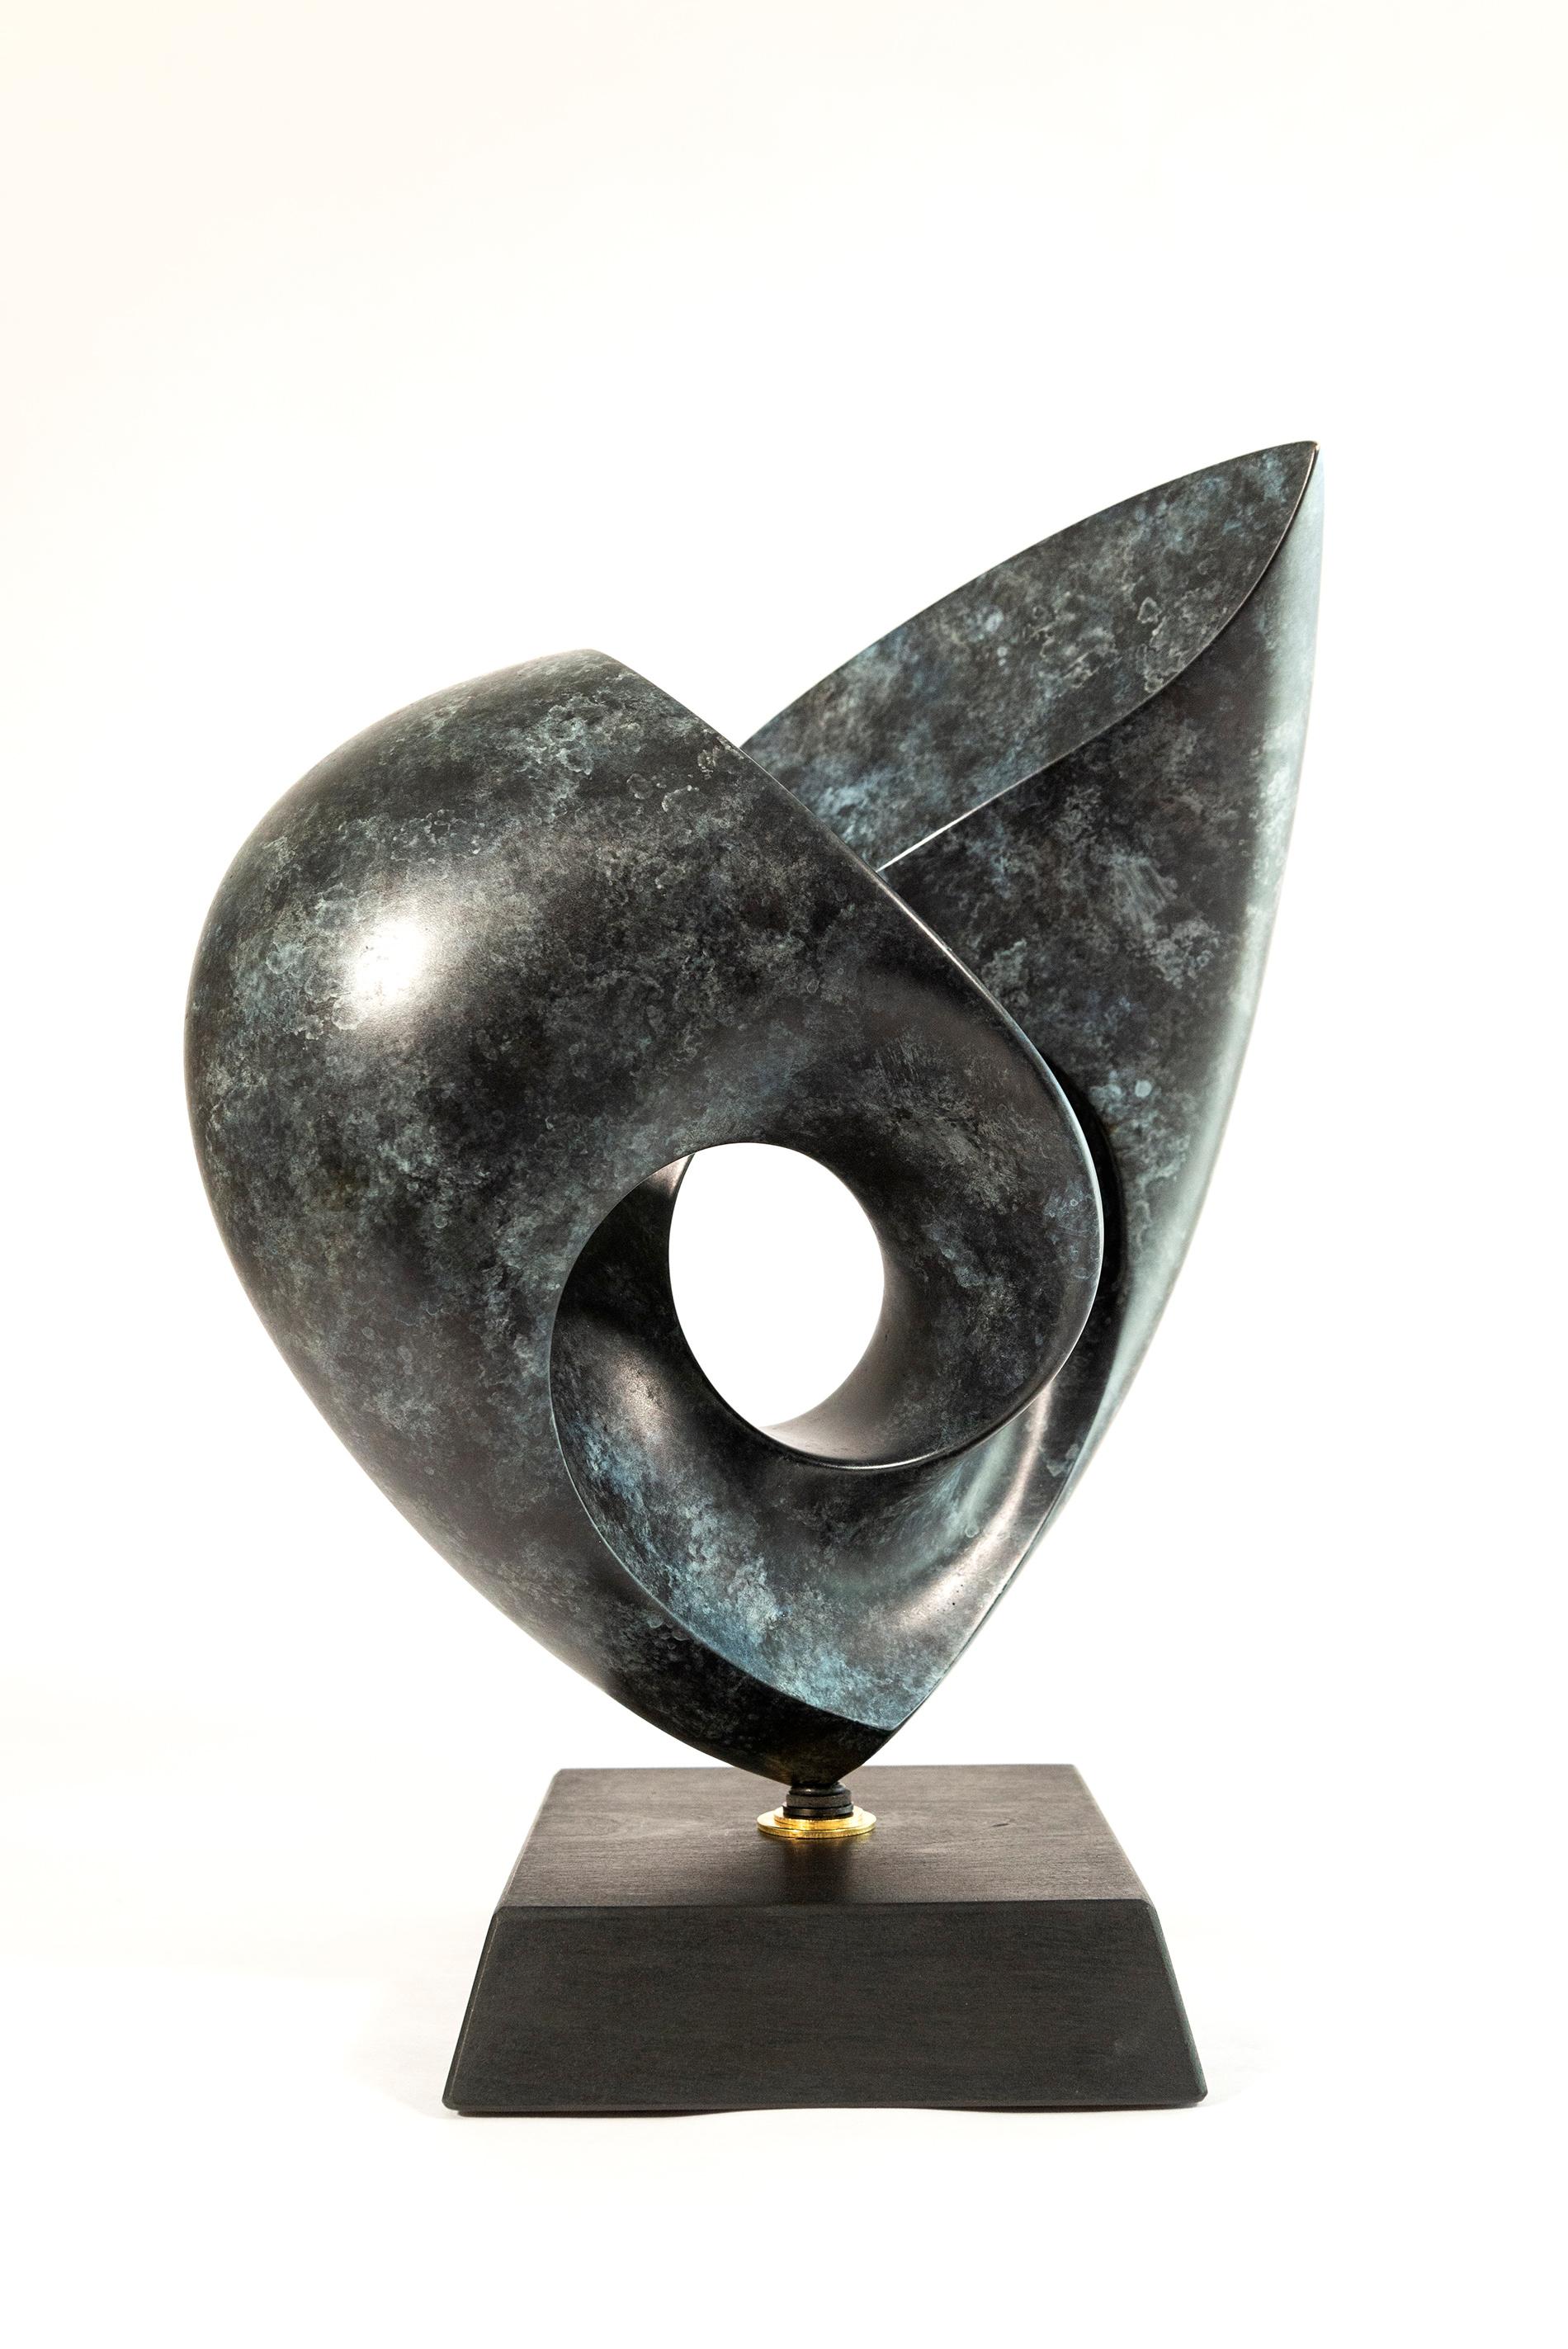 Rhapsody Ed. 1/15 - smooth, polished, abstract, bronze and mahogany sculpture For Sale 5